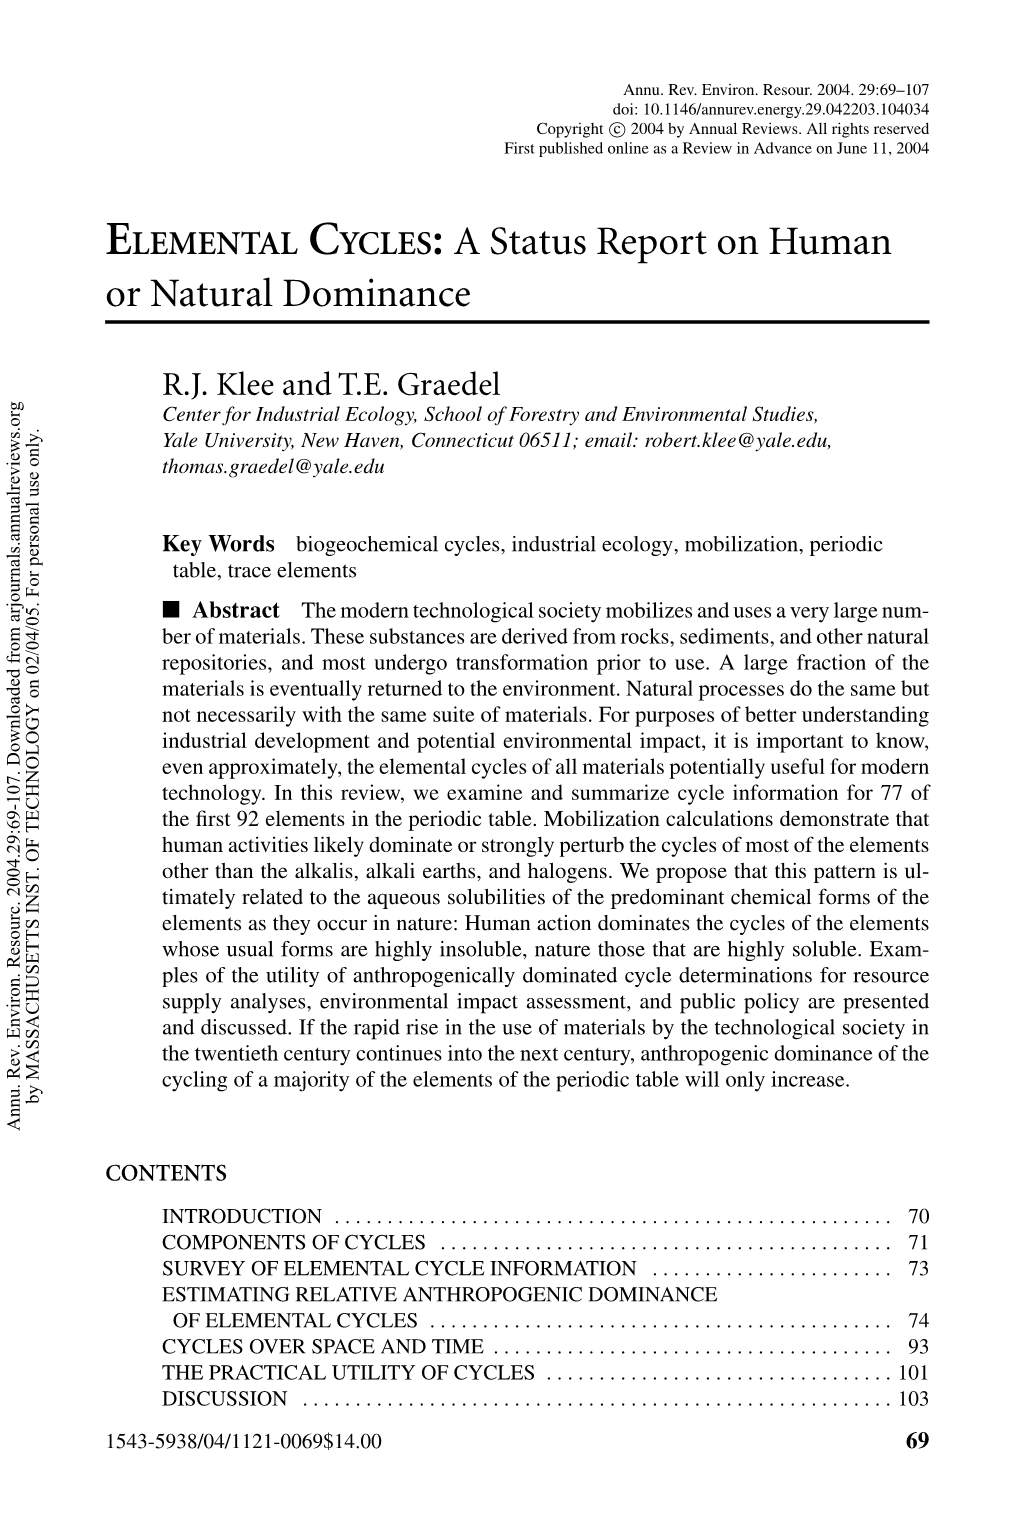 ELEMENTAL CYCLES: a Status Report on Human Or Natural Dominance